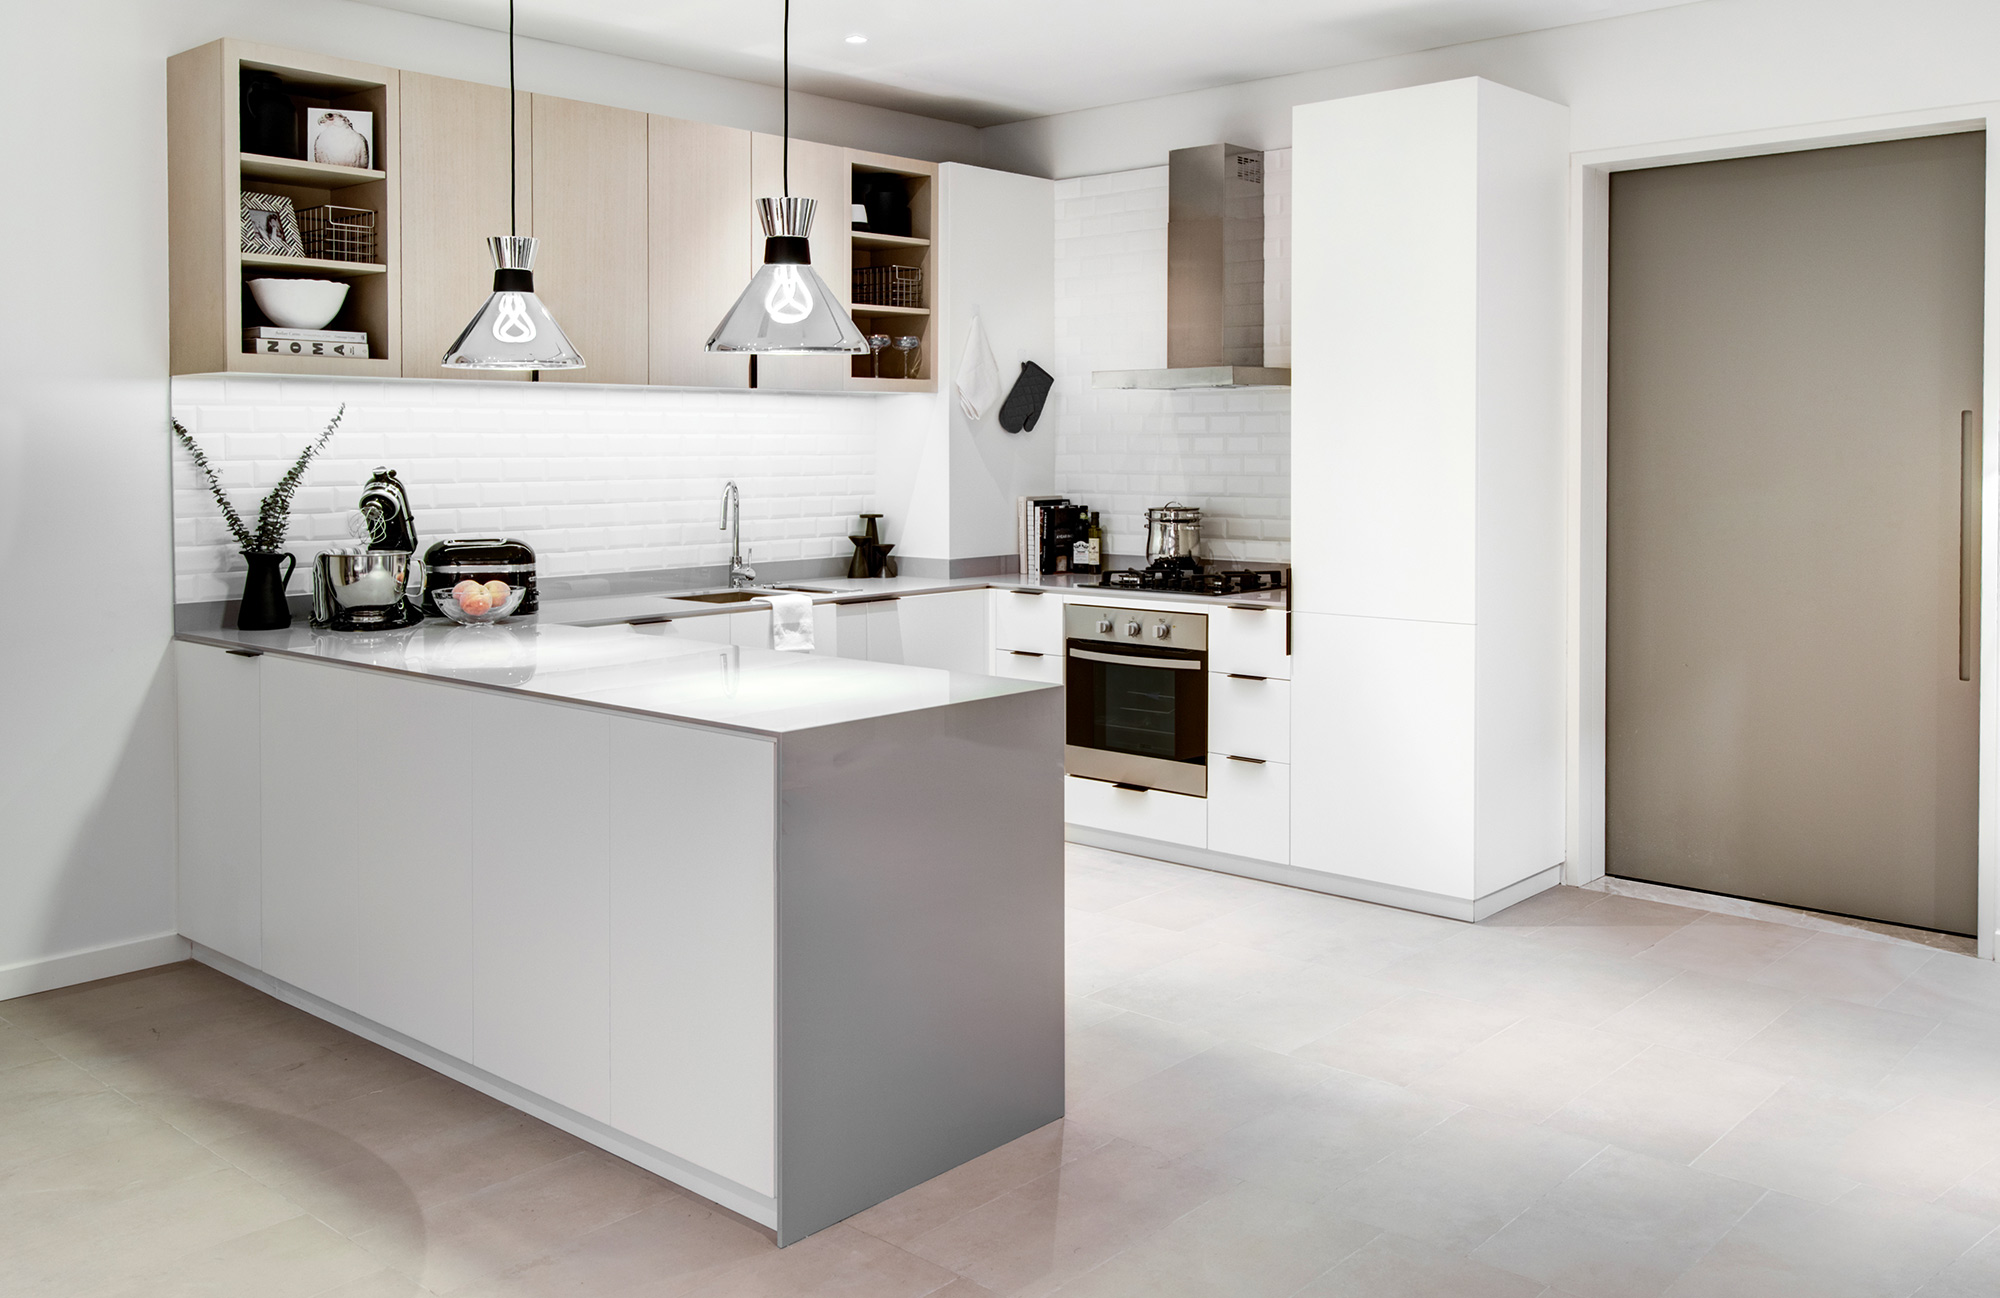 Image of Belgravia Heights I Show Apartment Kitchen in All in beige: a personal kitchen that blends styles by House Loves - Cosentino